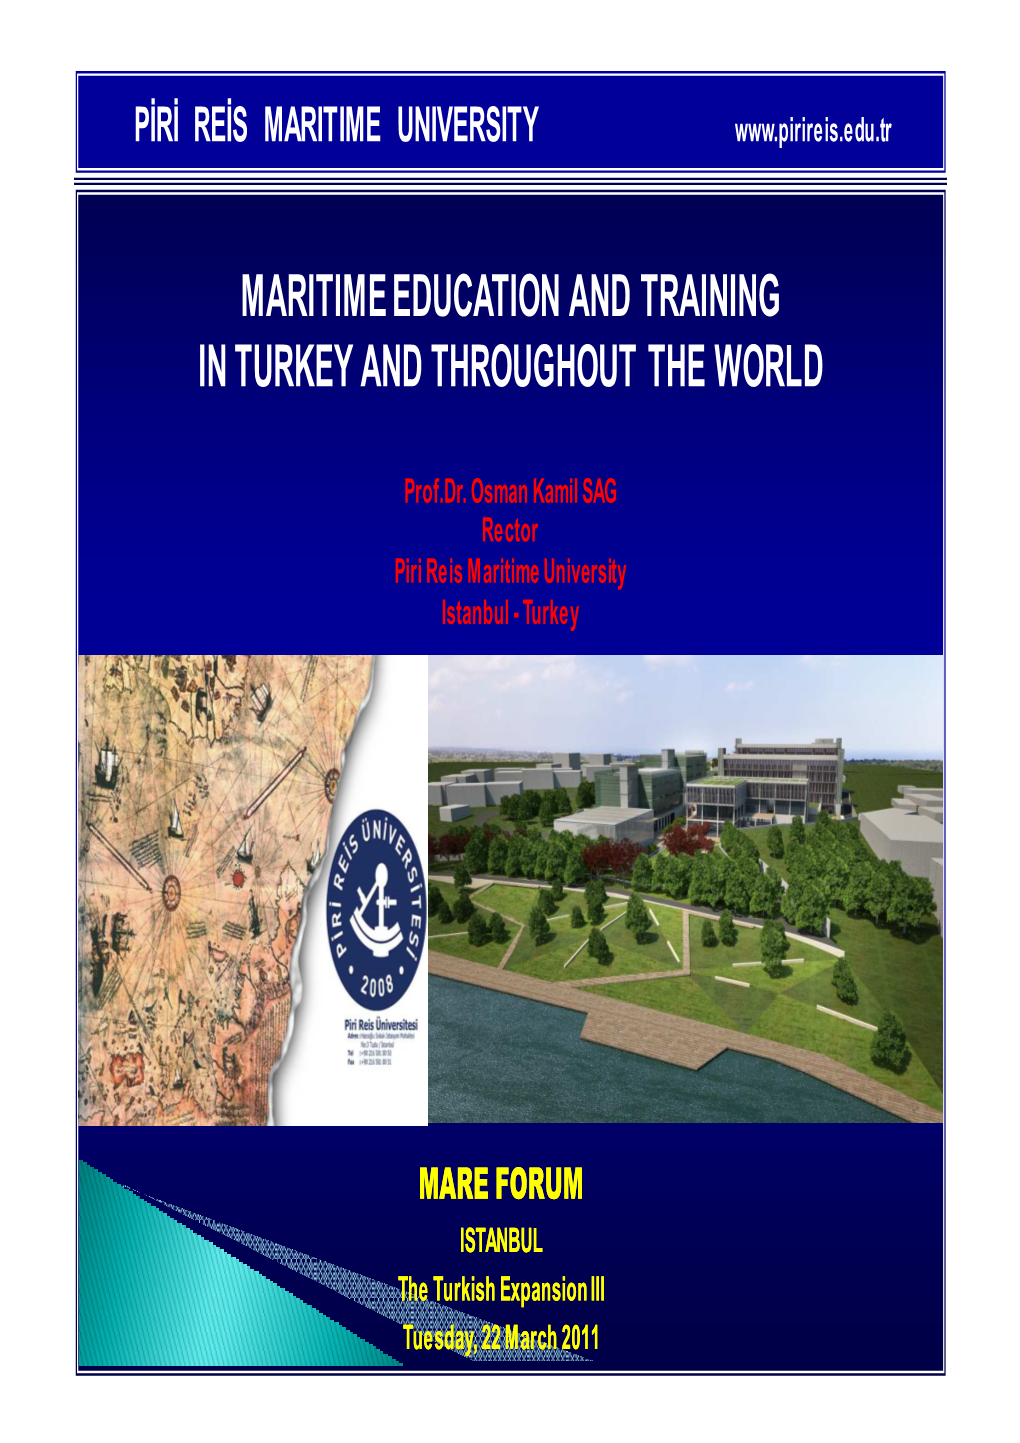 Maritime Education and Training in Turkey and Throughout the World